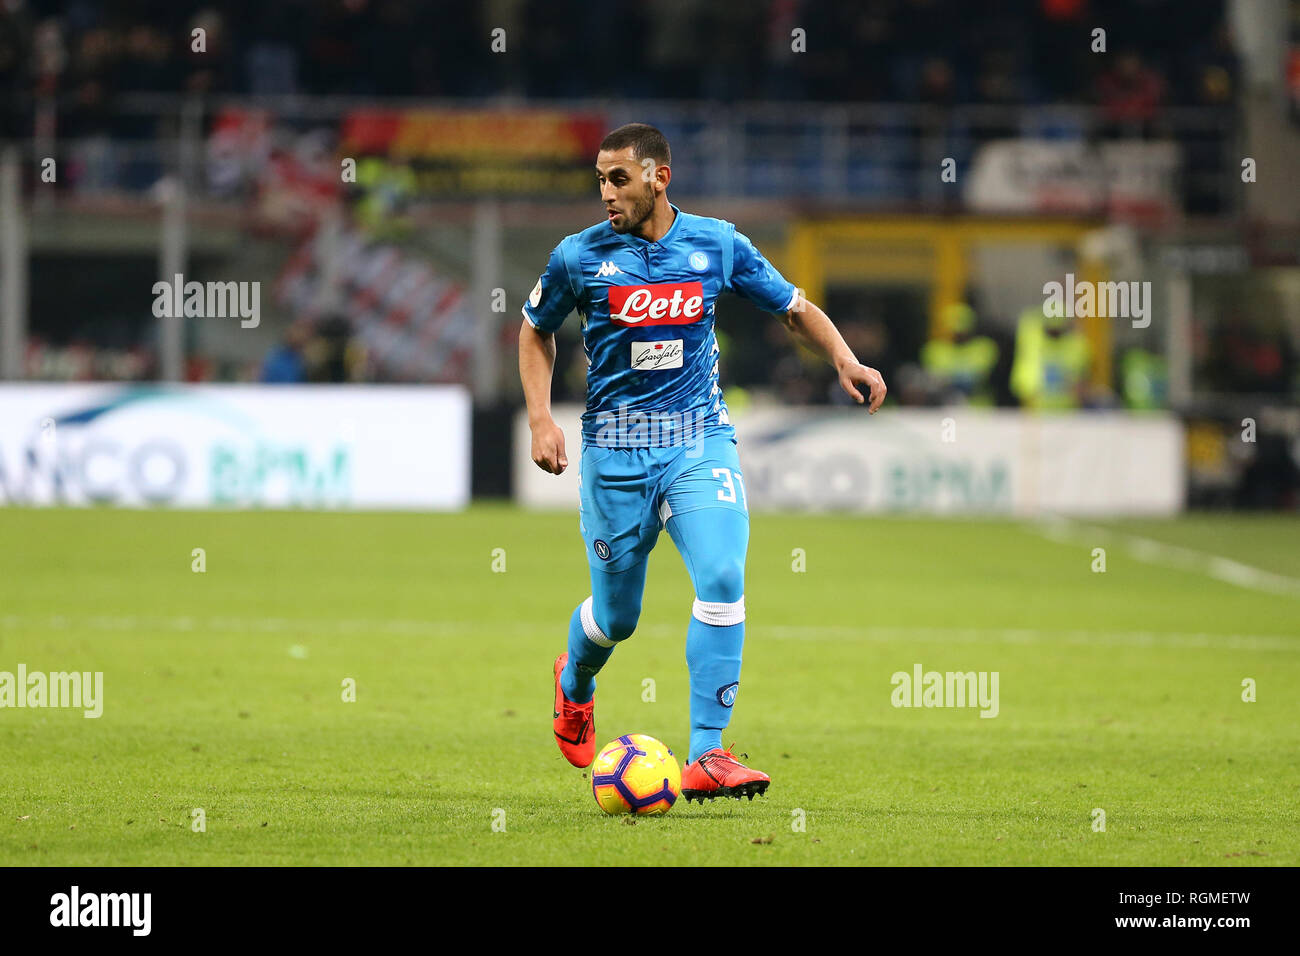 Milano, Italy. 29th January, 2019.  Faouzi Ghoulam of Ssc Napoli in action   during Coppa Italia football match between AC Milan and Ssc Napoli. Credit: Marco Canoniero/Alamy Live News Stock Photo